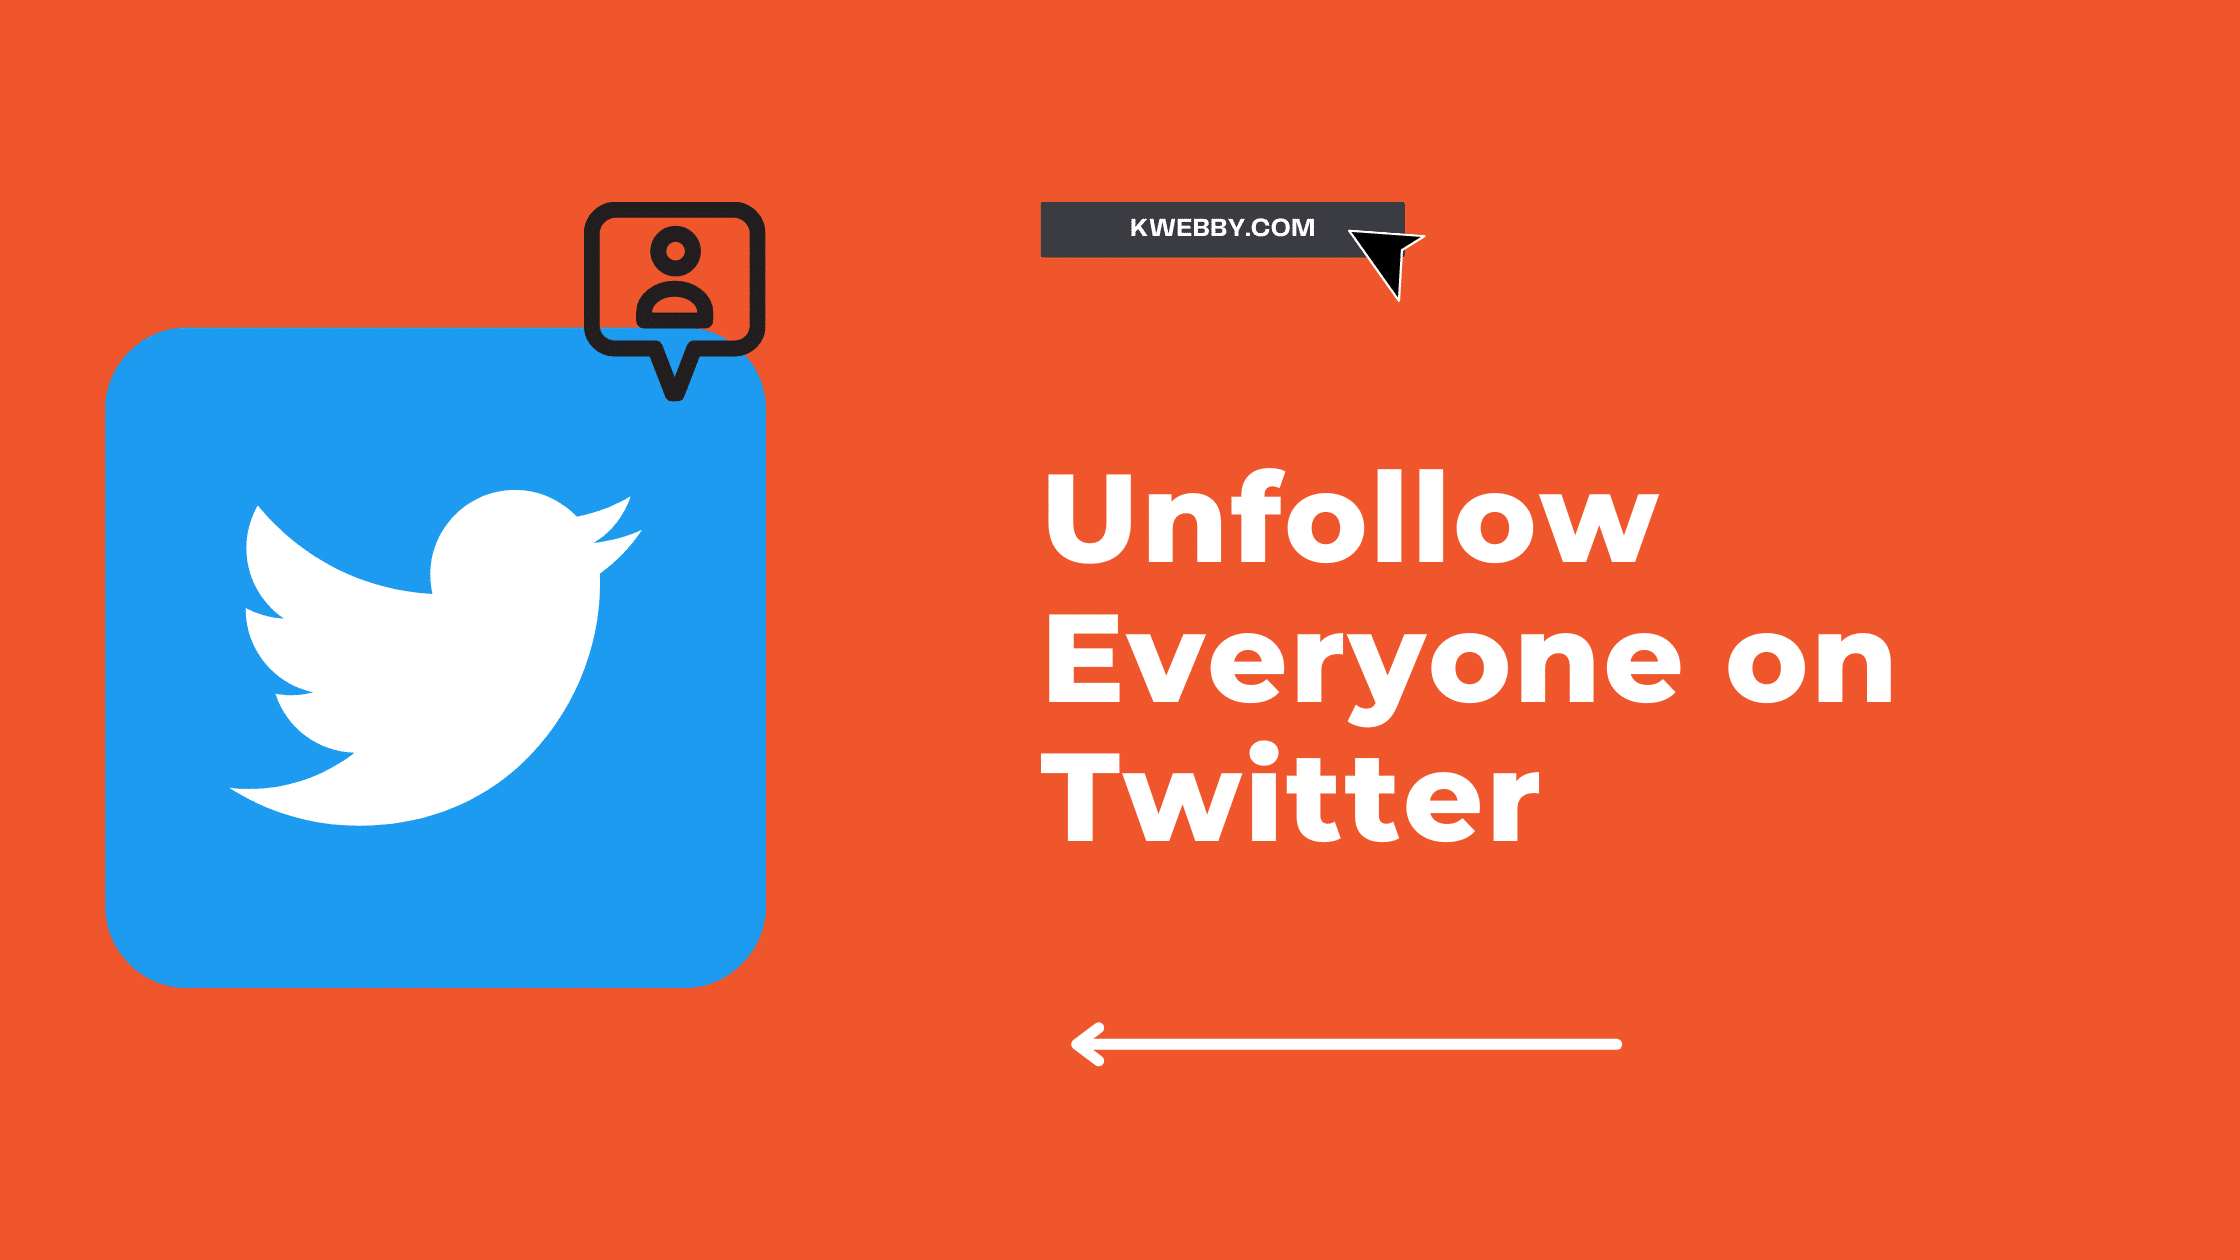 How to Unfollow Everyone on Twitter in 1 Click with this trick!